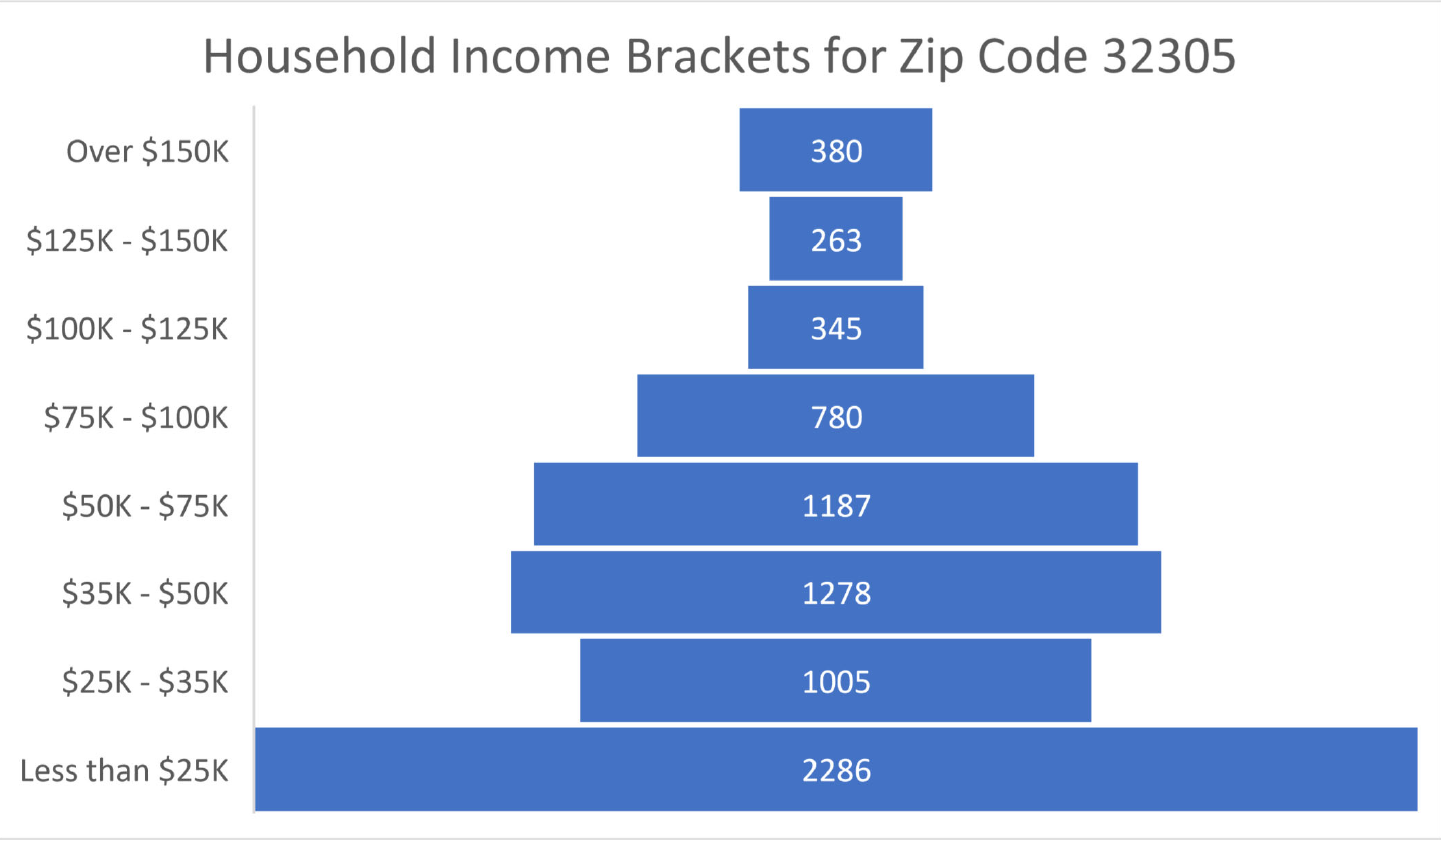 Income distribution in 32305. The biggest part of the population has an income below $25,000.